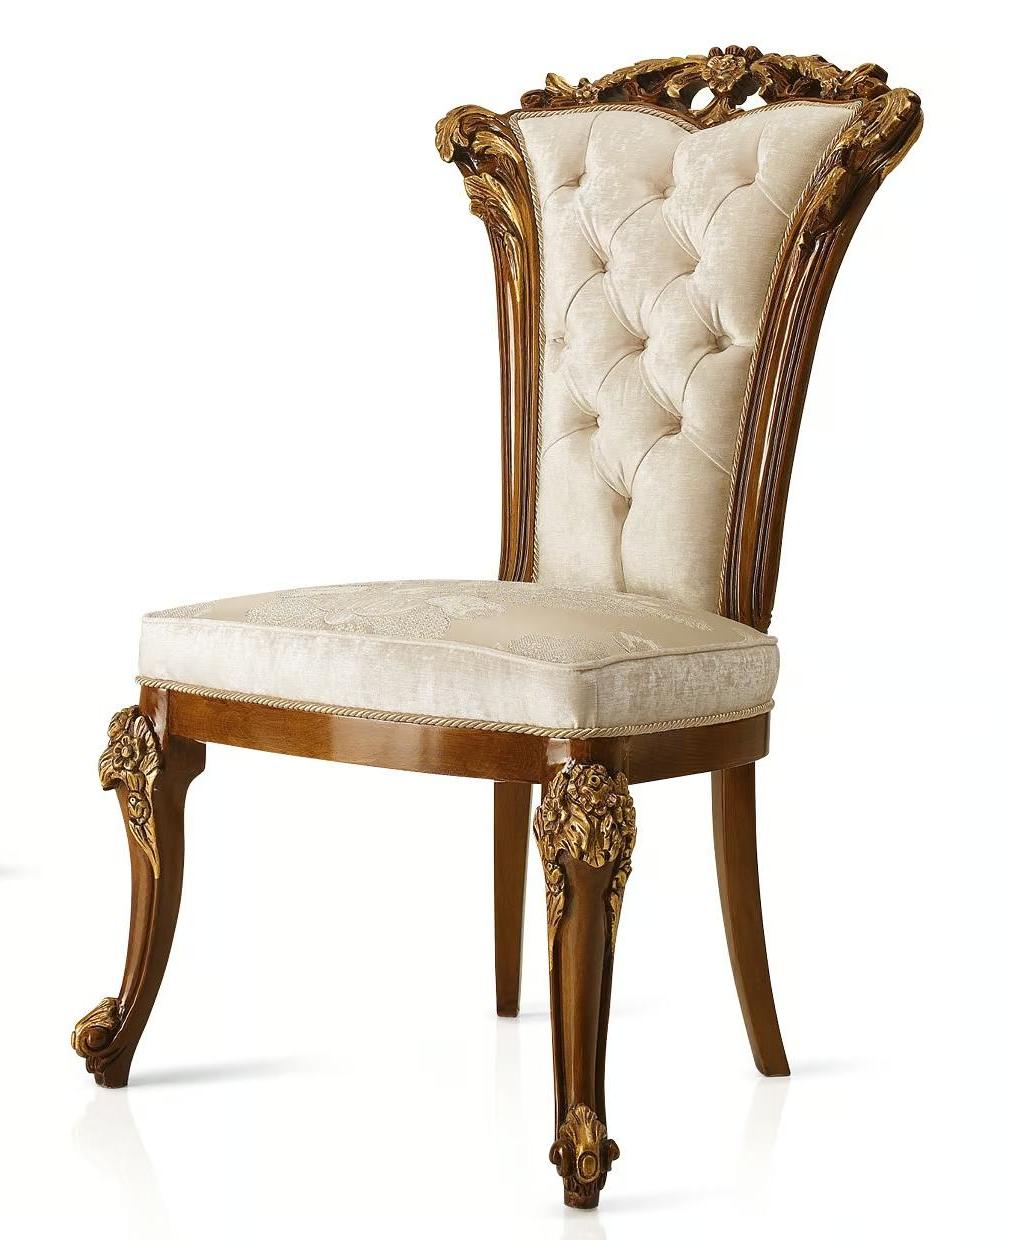 Dolcevita Artisan Crafted Chair